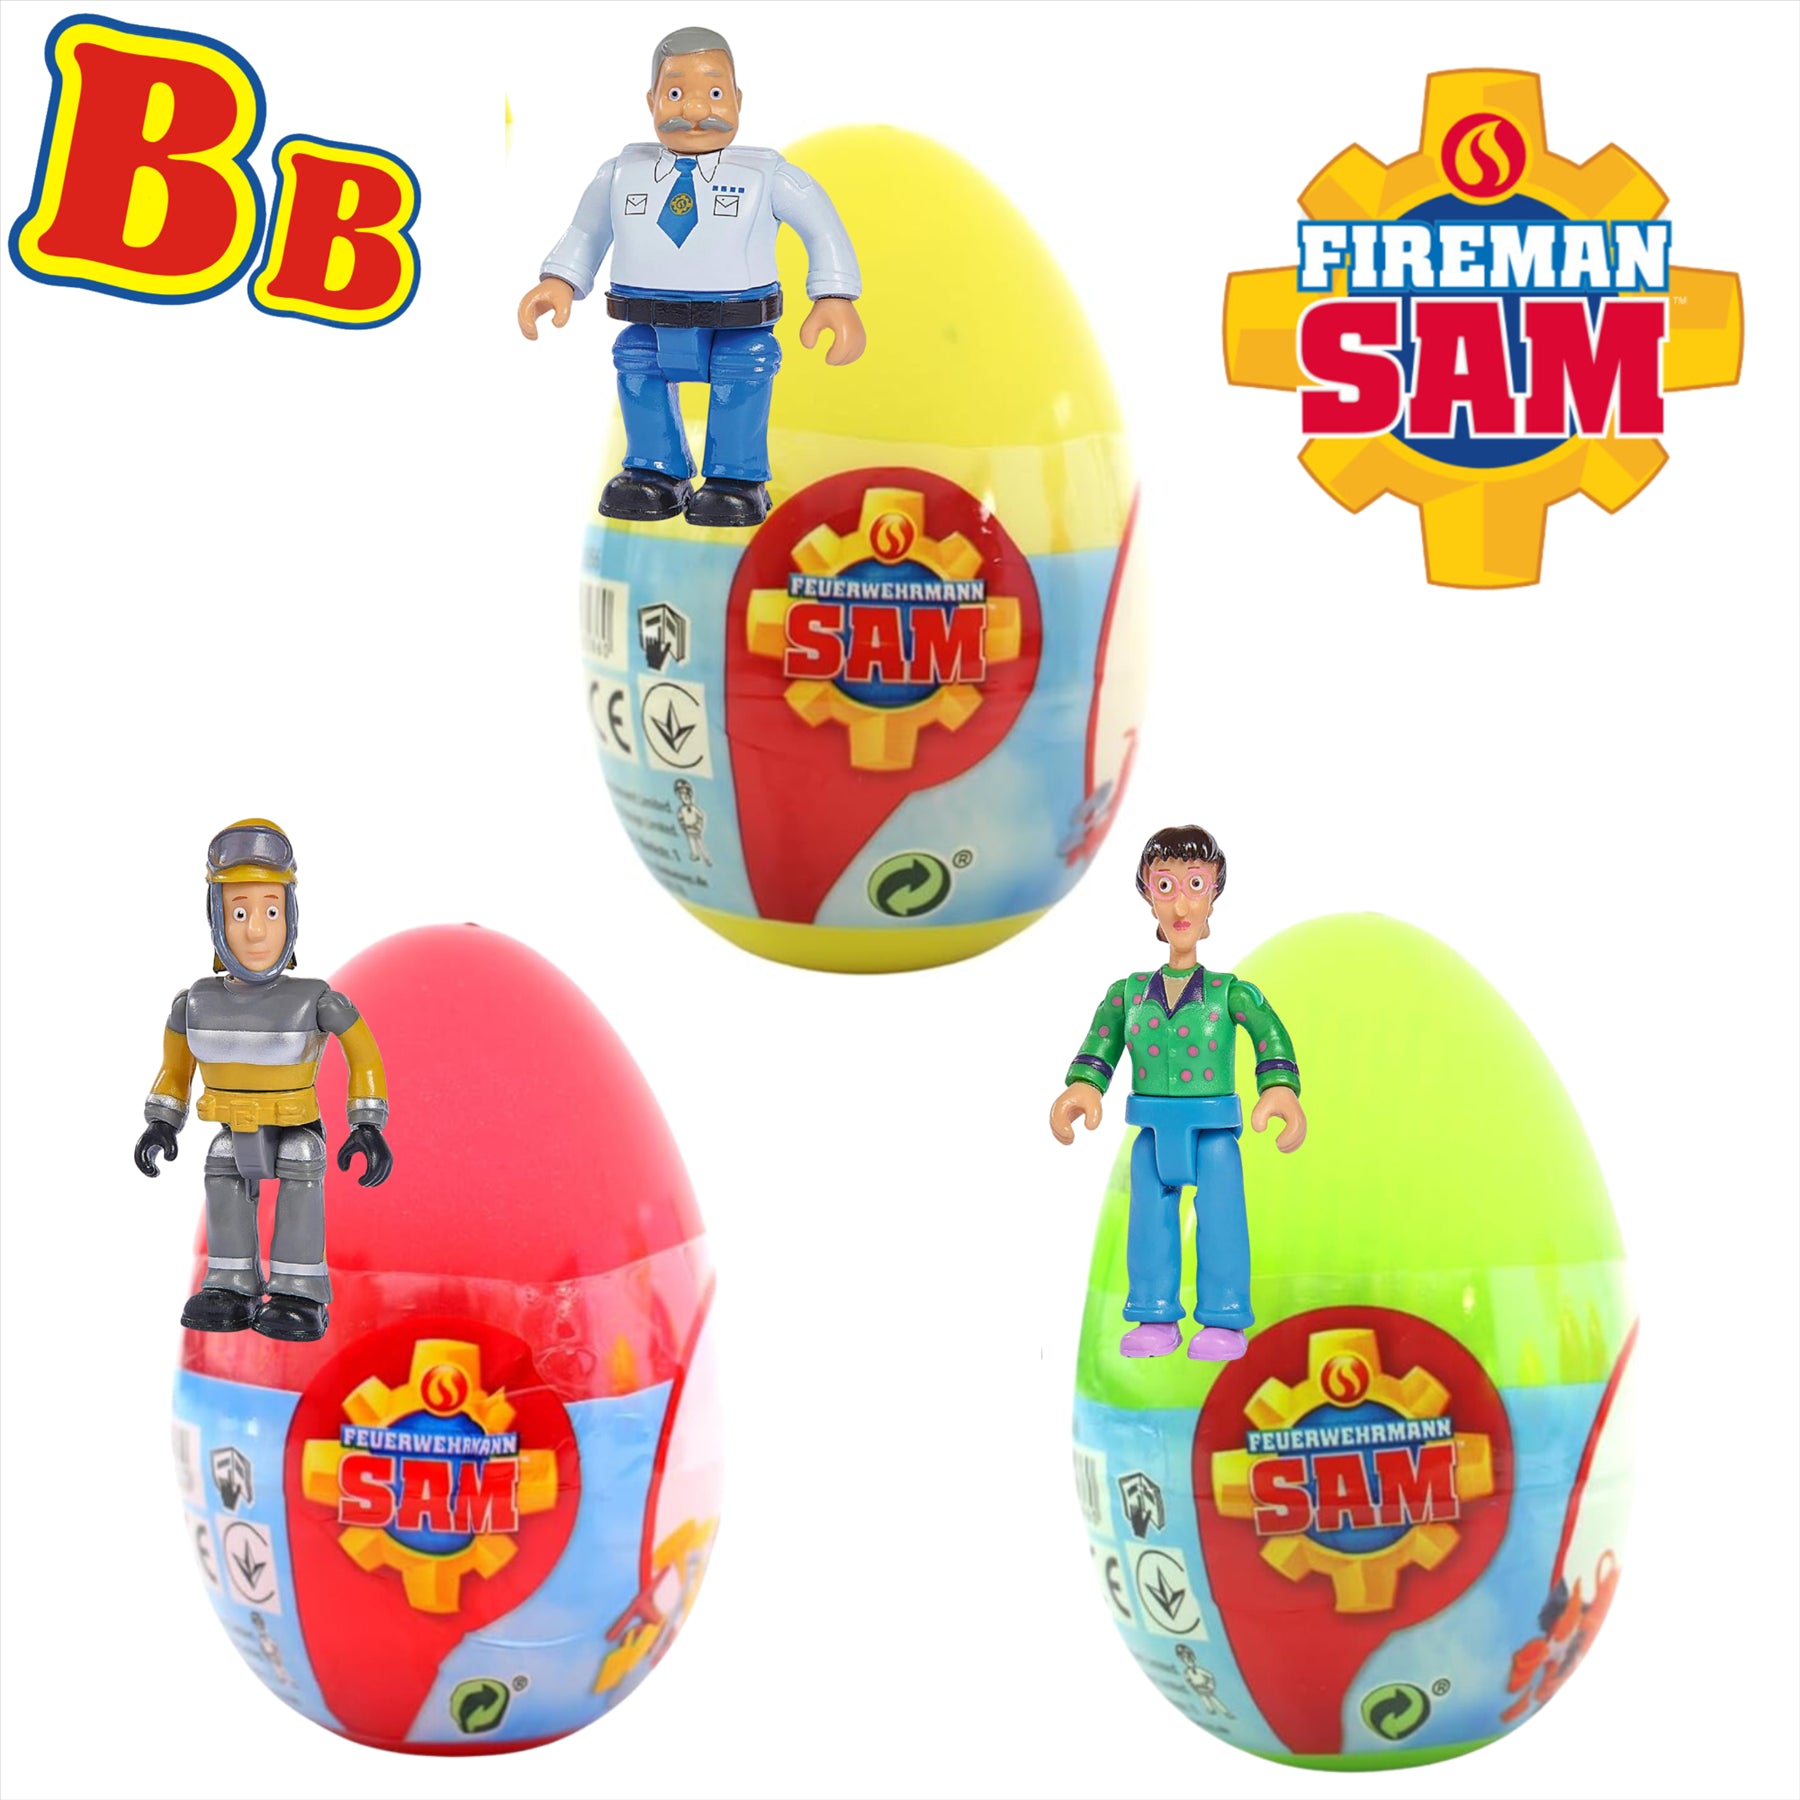 Fireman Sam Articulated Play Figure Capsule Characters - Fire Captain Steele, Dylis Price & Arnold McKinley - Toptoys2u